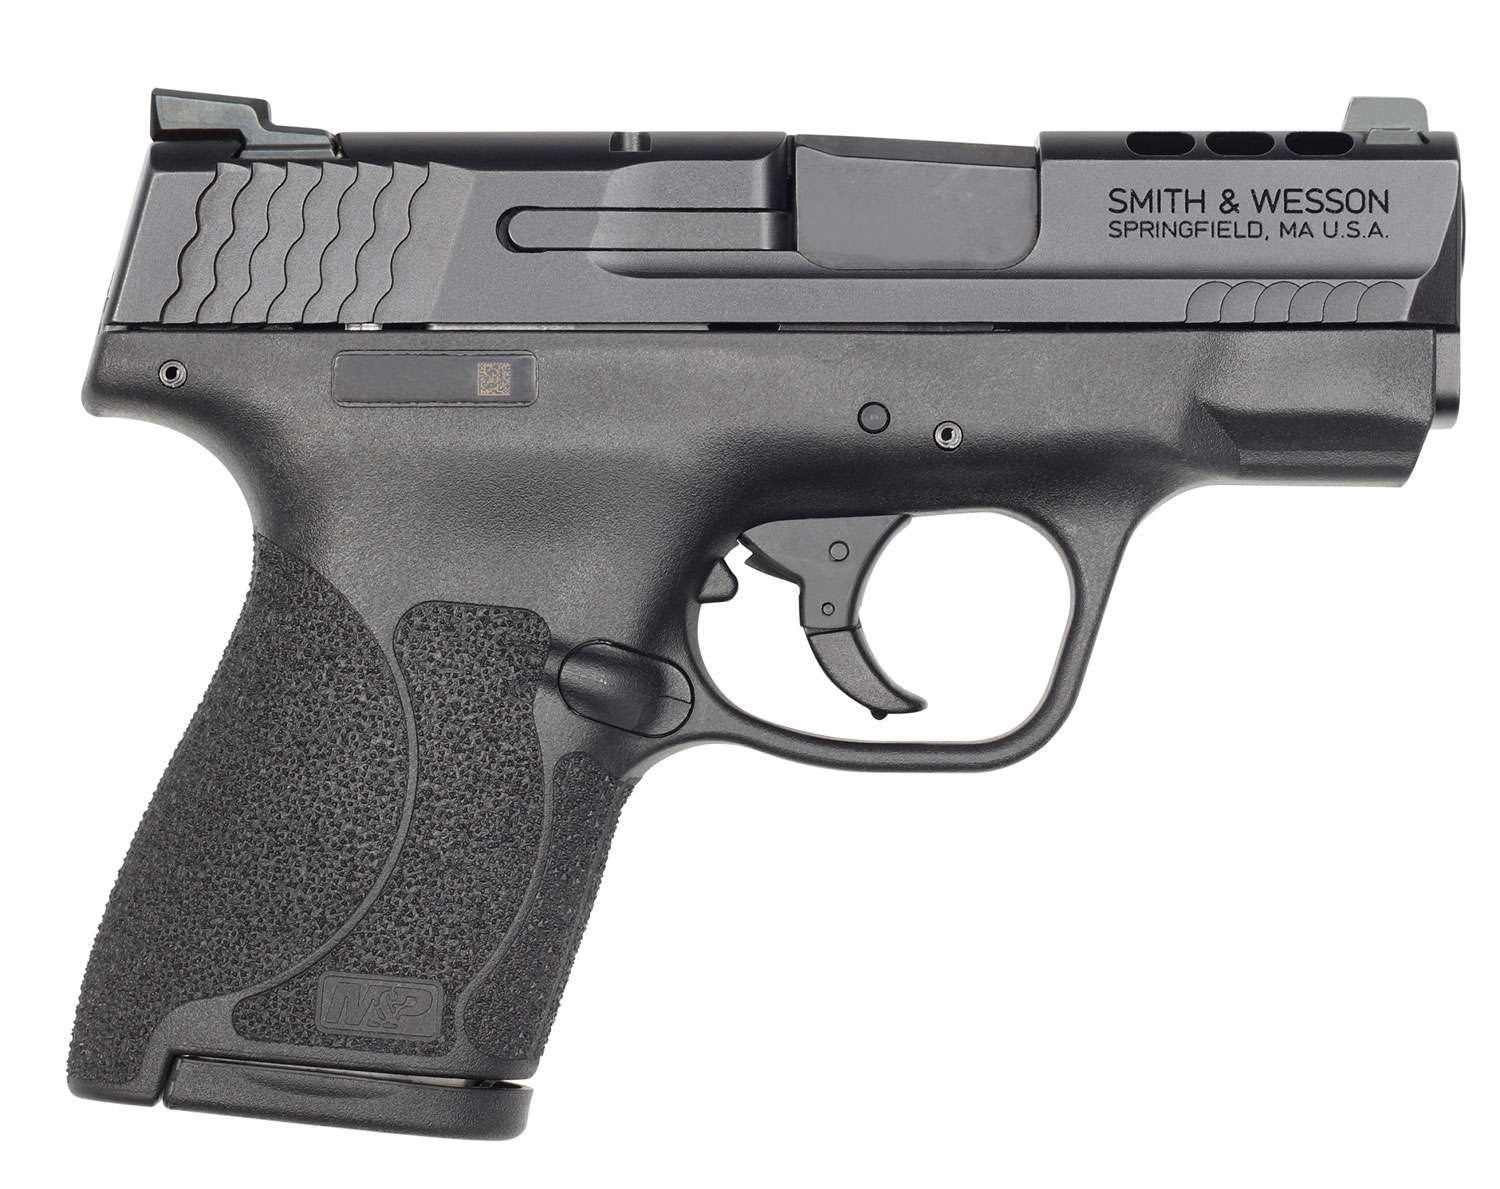 Smith & Wesson 11869 M&P Shield Performance Center M2.0 9mm Luger 3.10